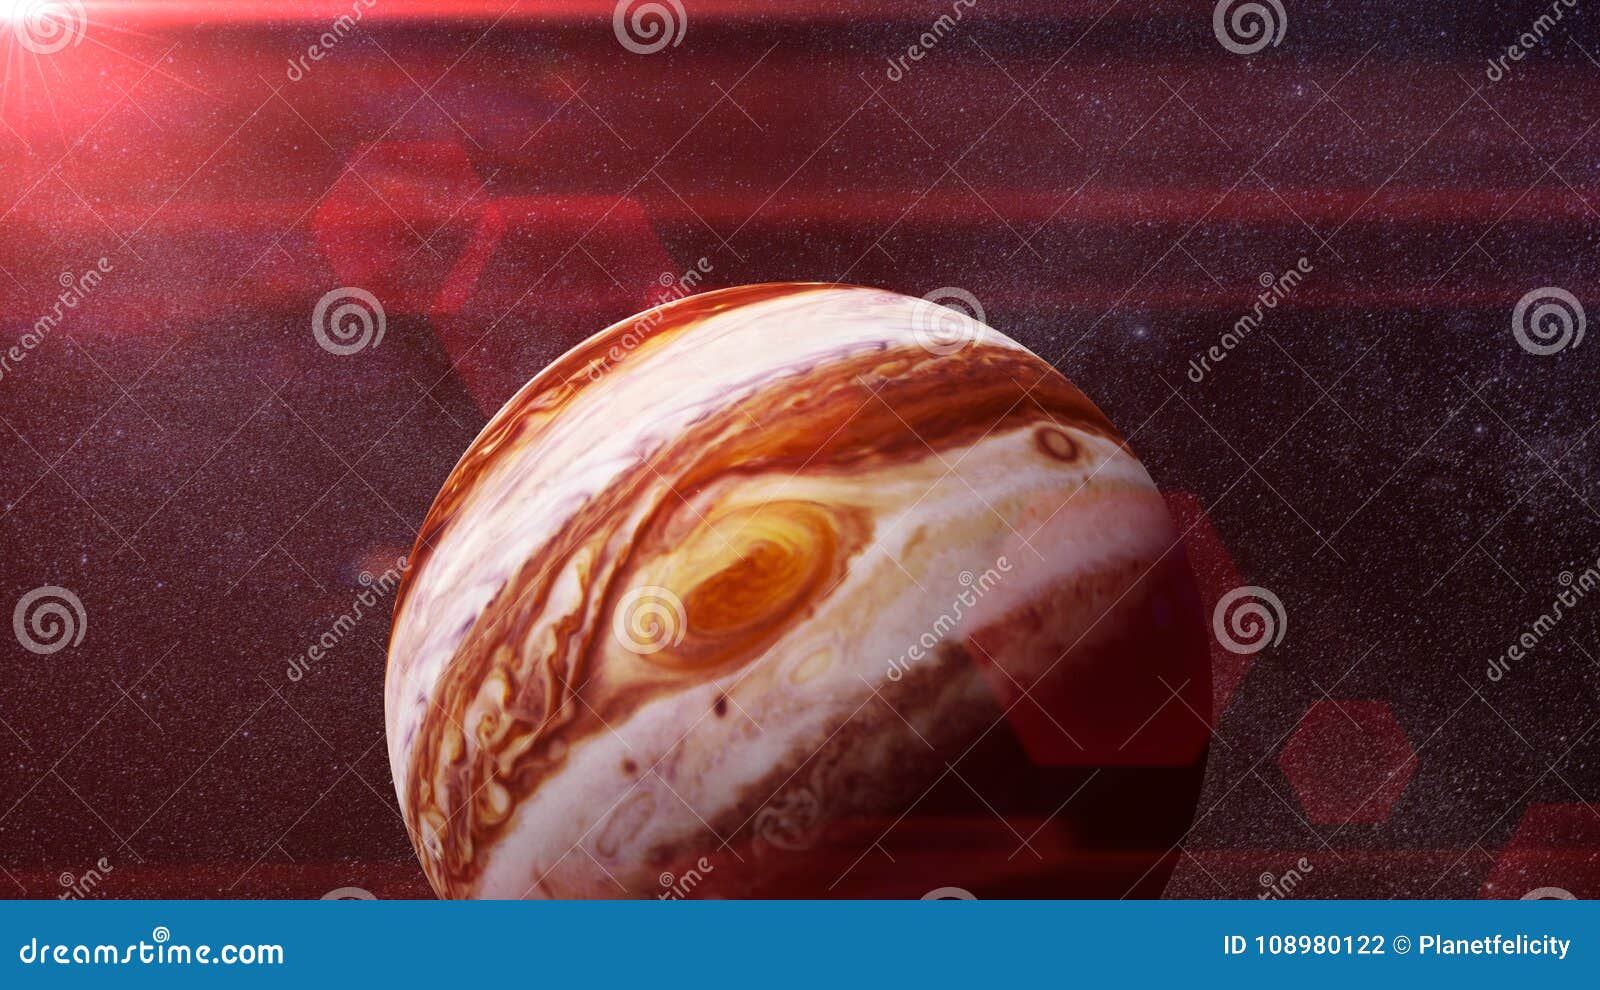 planet jupiter the sun and the stars 3d rendering, s of this image are furnished by nasa